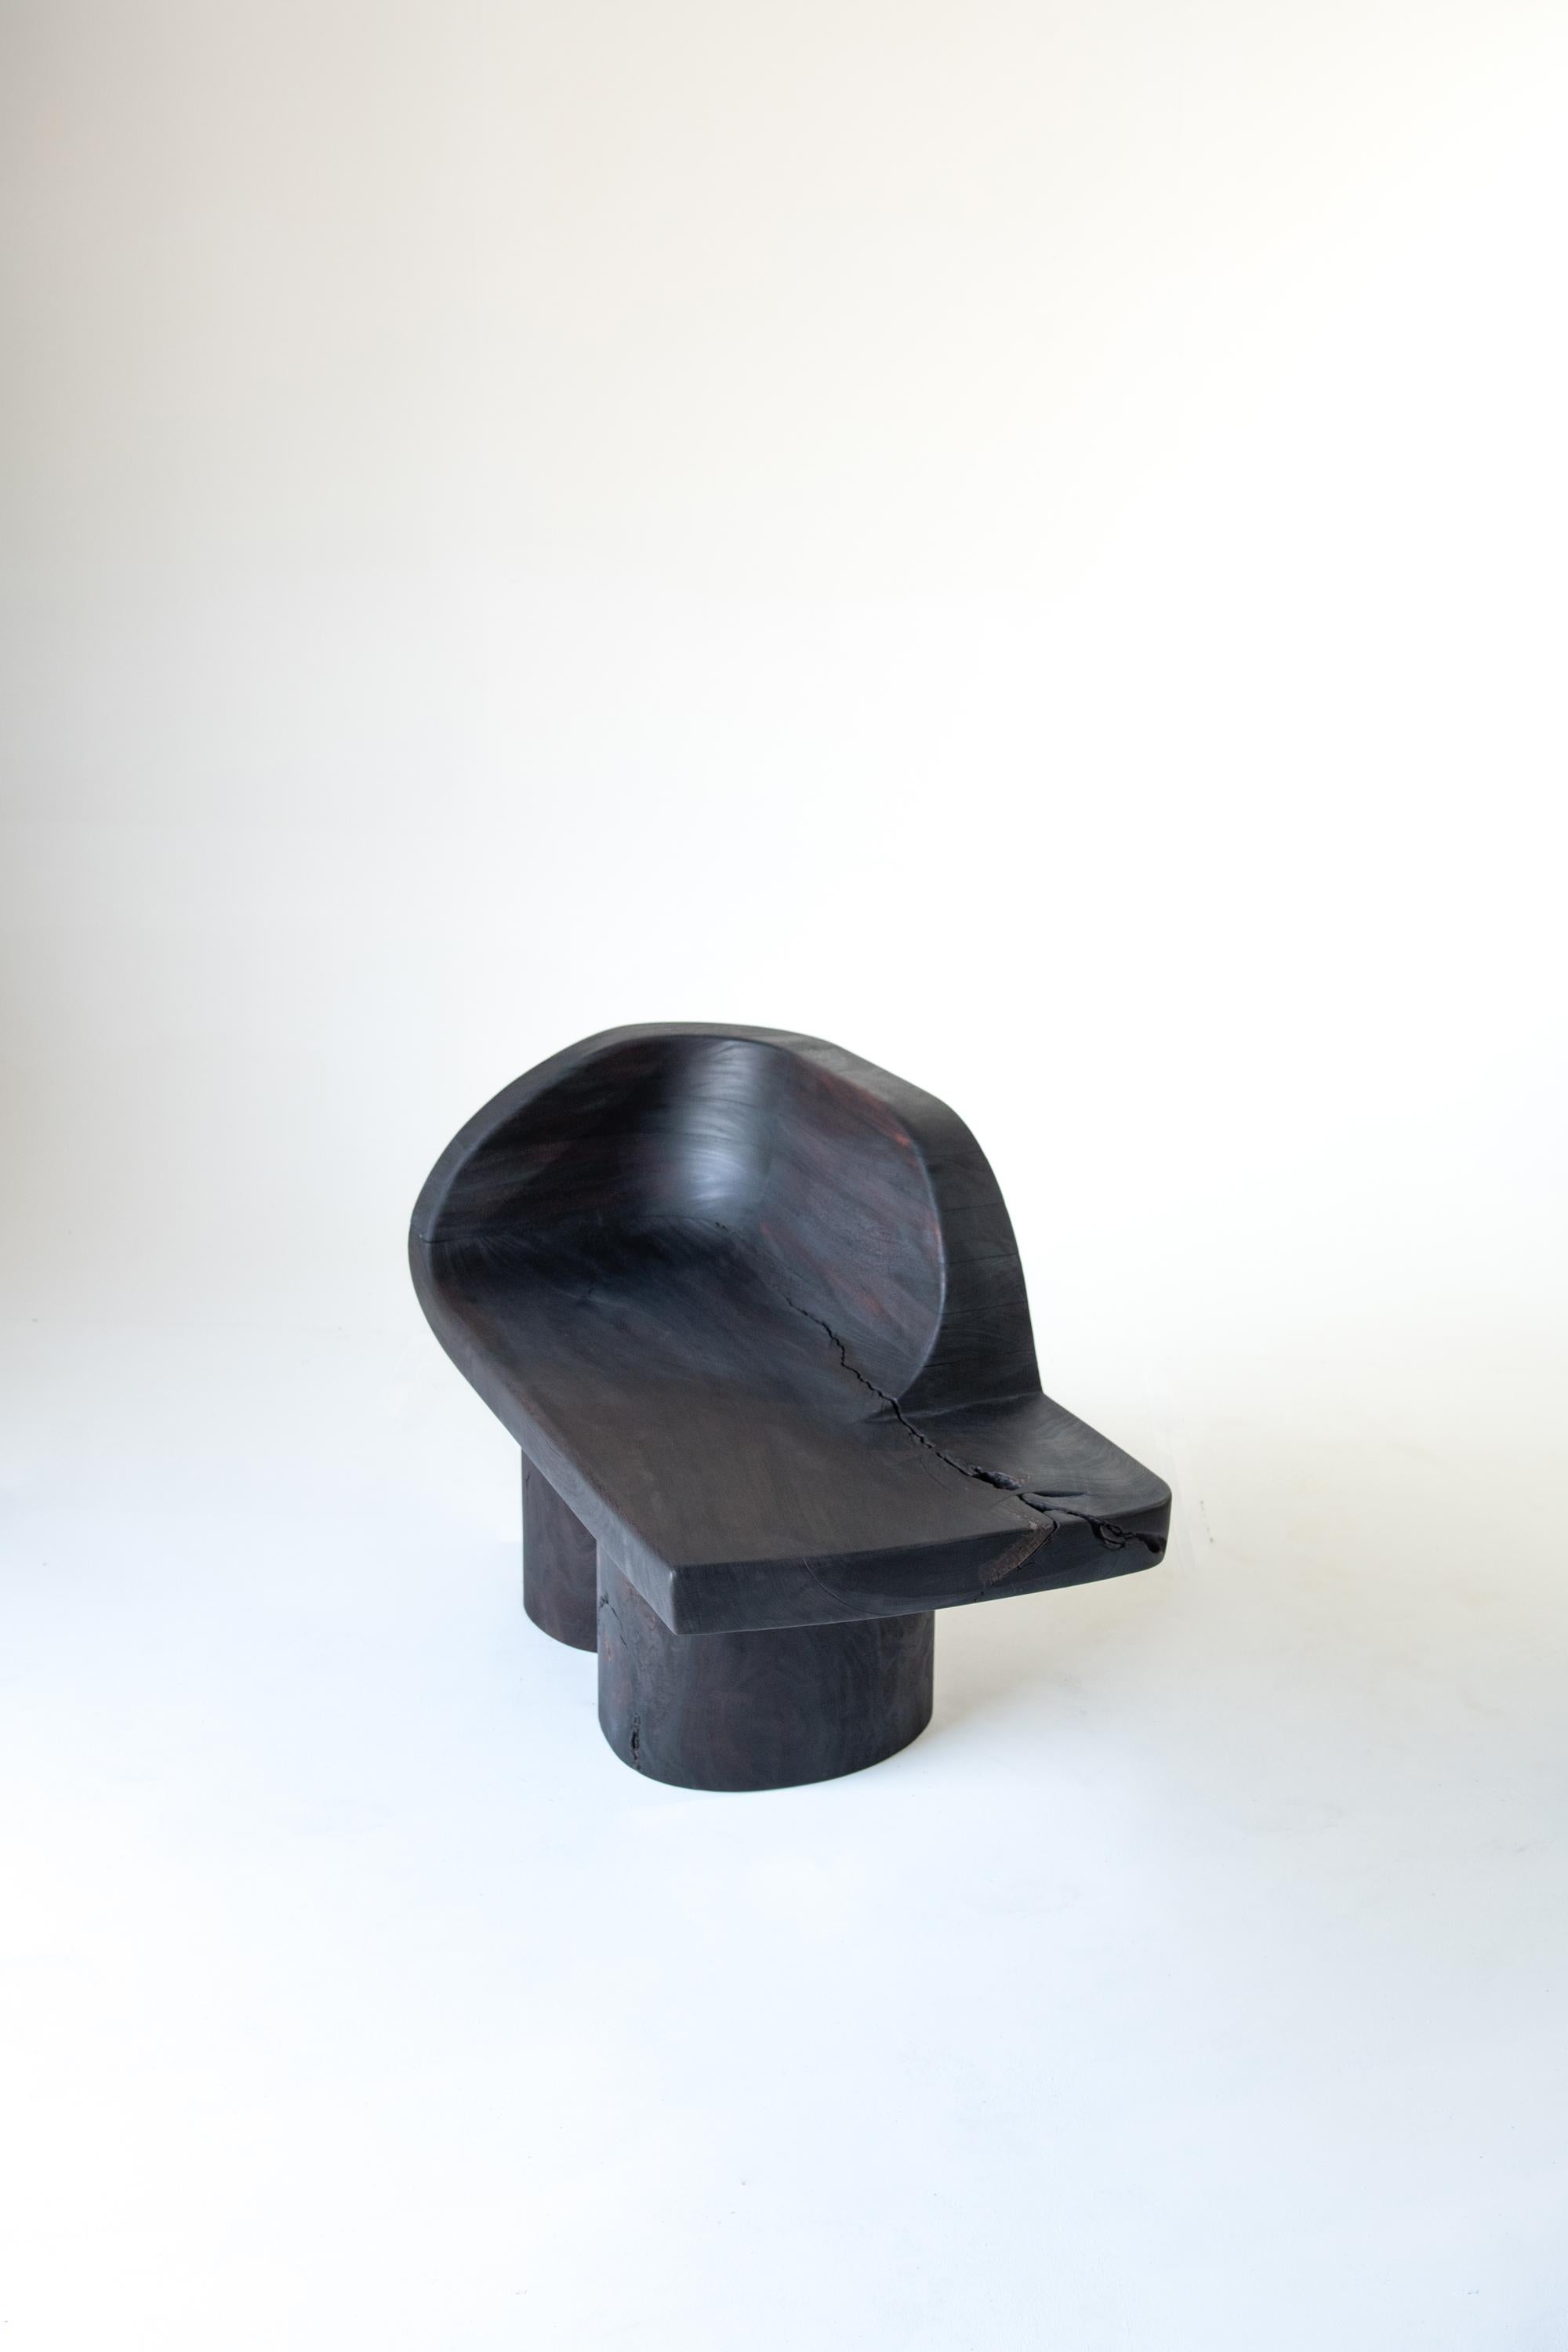 Reynold Rodriguez
Sometimes an Elephant/ Chaise, 2020
Charred hand-carved mahogany and almendro wood
28 x 42 x 21 in
Seat height 17.5 in
Edition of 8

Made of charred wood salvaged from trees that fell during the devastation of Hurricane Maria in